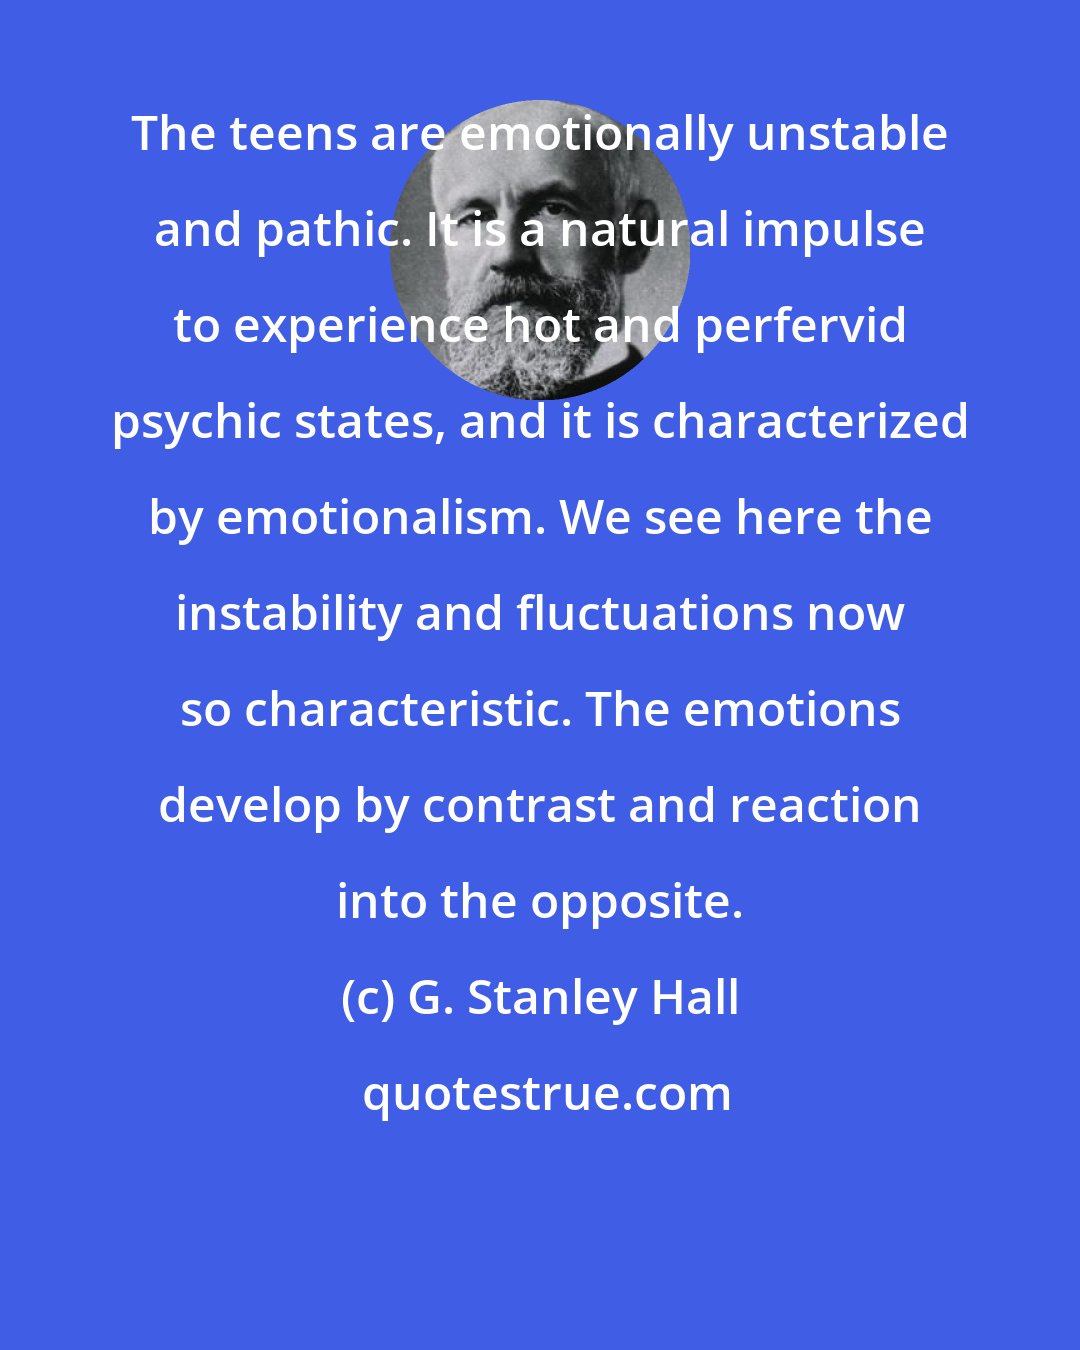 G. Stanley Hall: The teens are emotionally unstable and pathic. It is a natural impulse to experience hot and perfervid psychic states, and it is characterized by emotionalism. We see here the instability and fluctuations now so characteristic. The emotions develop by contrast and reaction into the opposite.